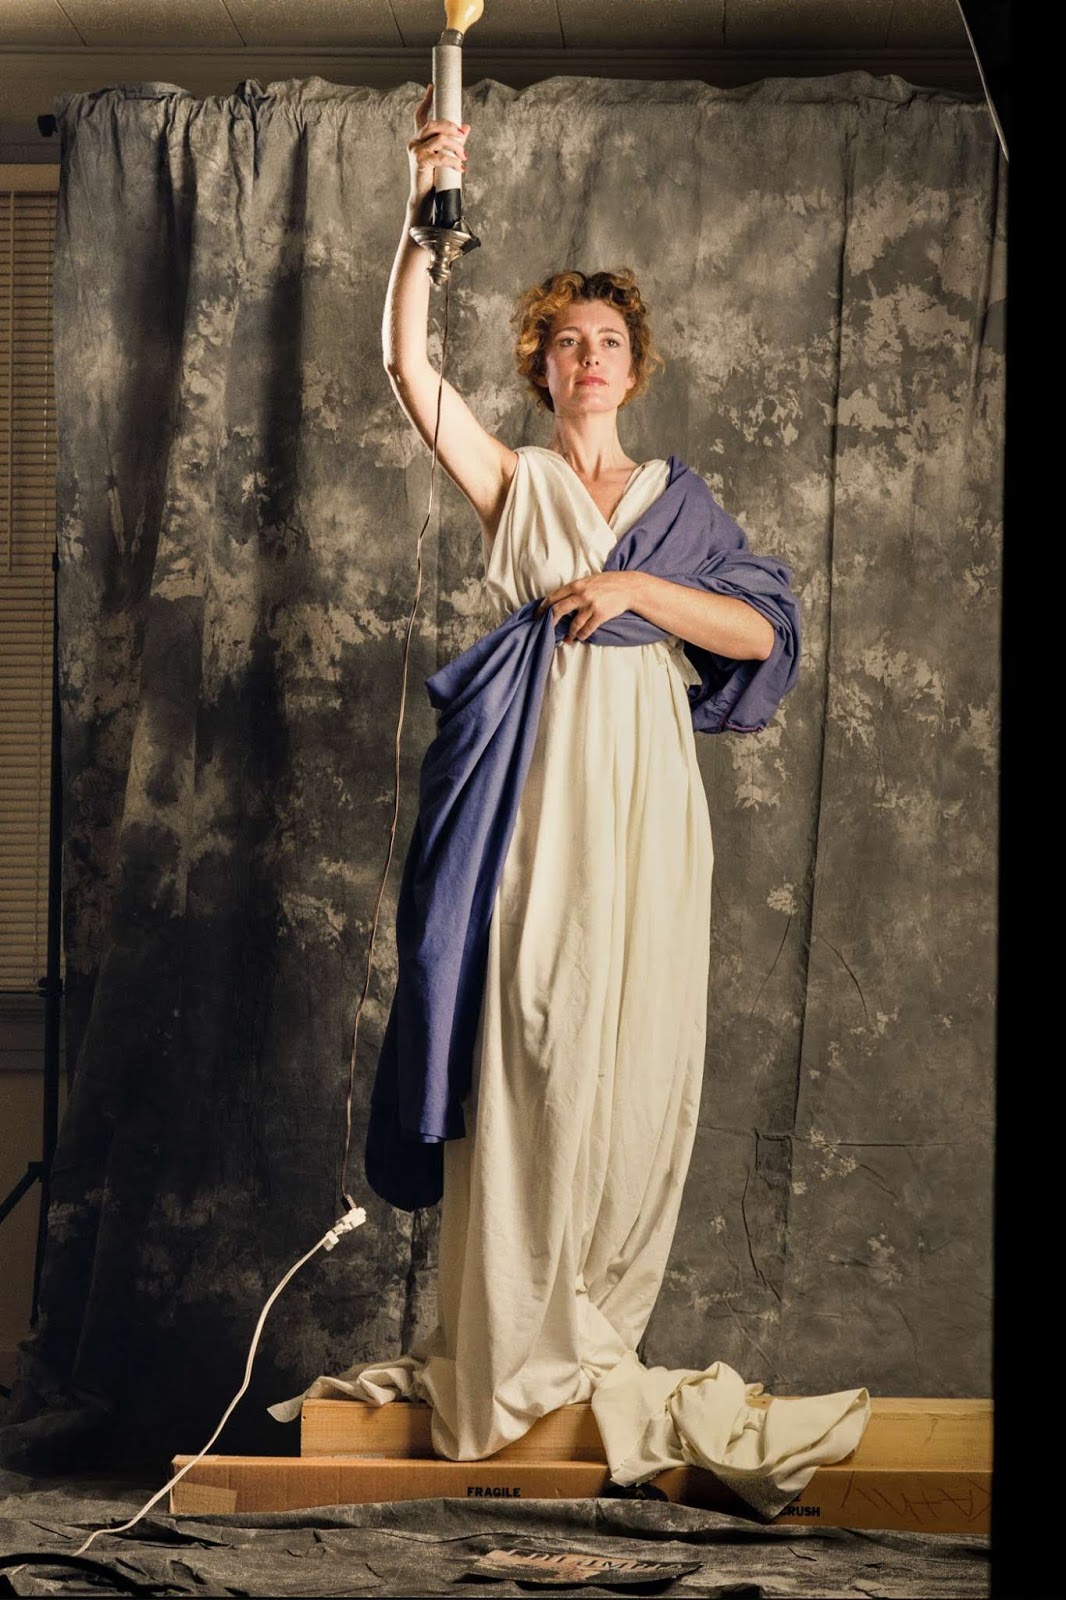 Photographer Shares Story Behind The Iconic Columbia Pictures Logo Photoshoot